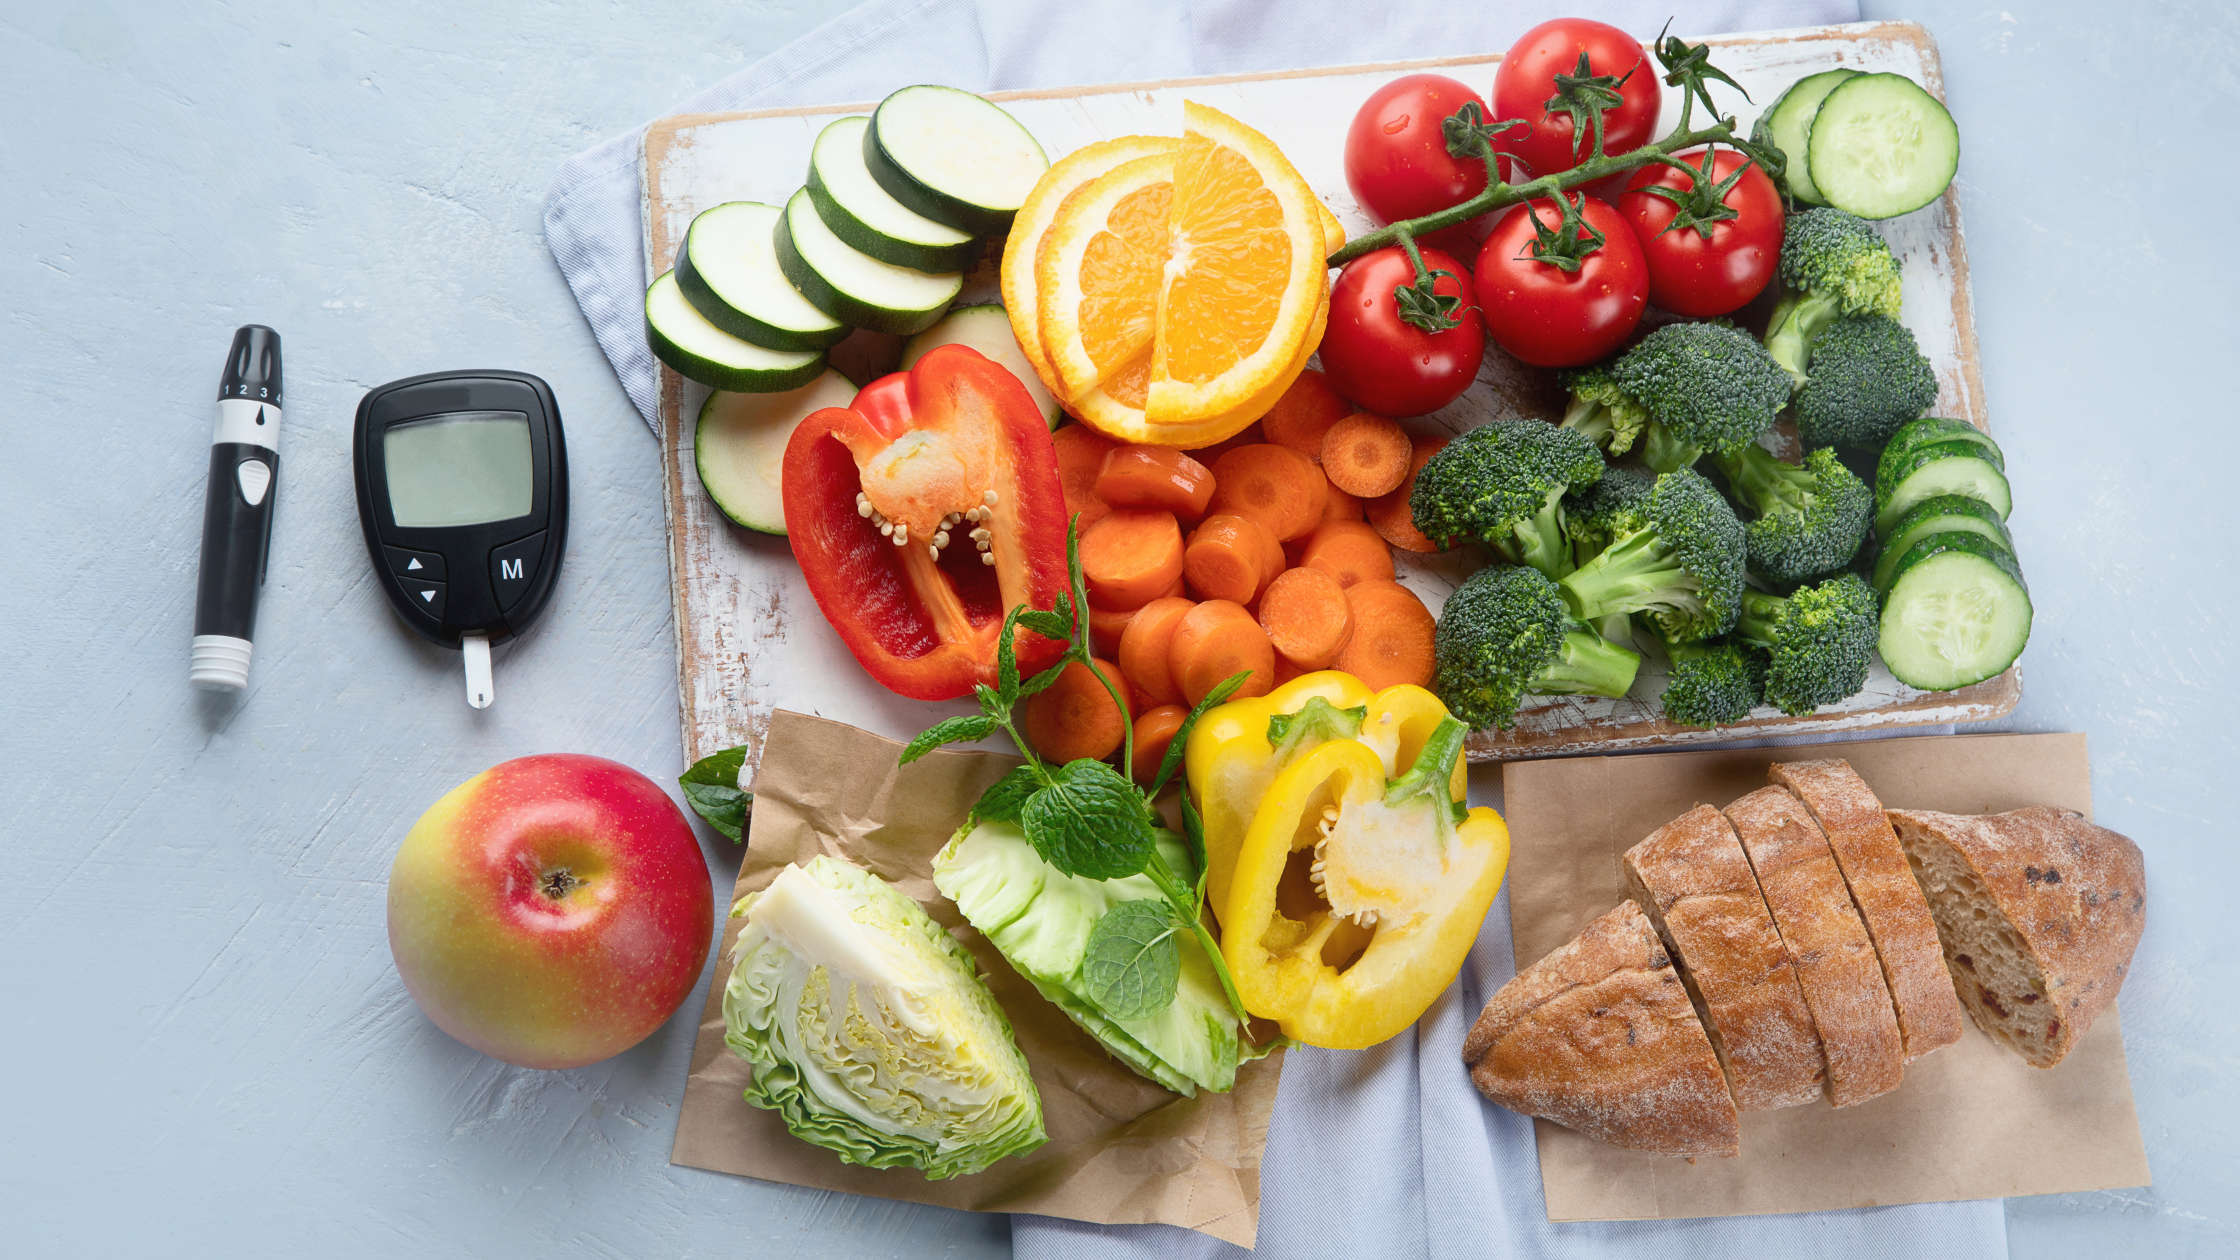 Ingredients for a healthy low-sugar diet alongside a blood glucose measuring device